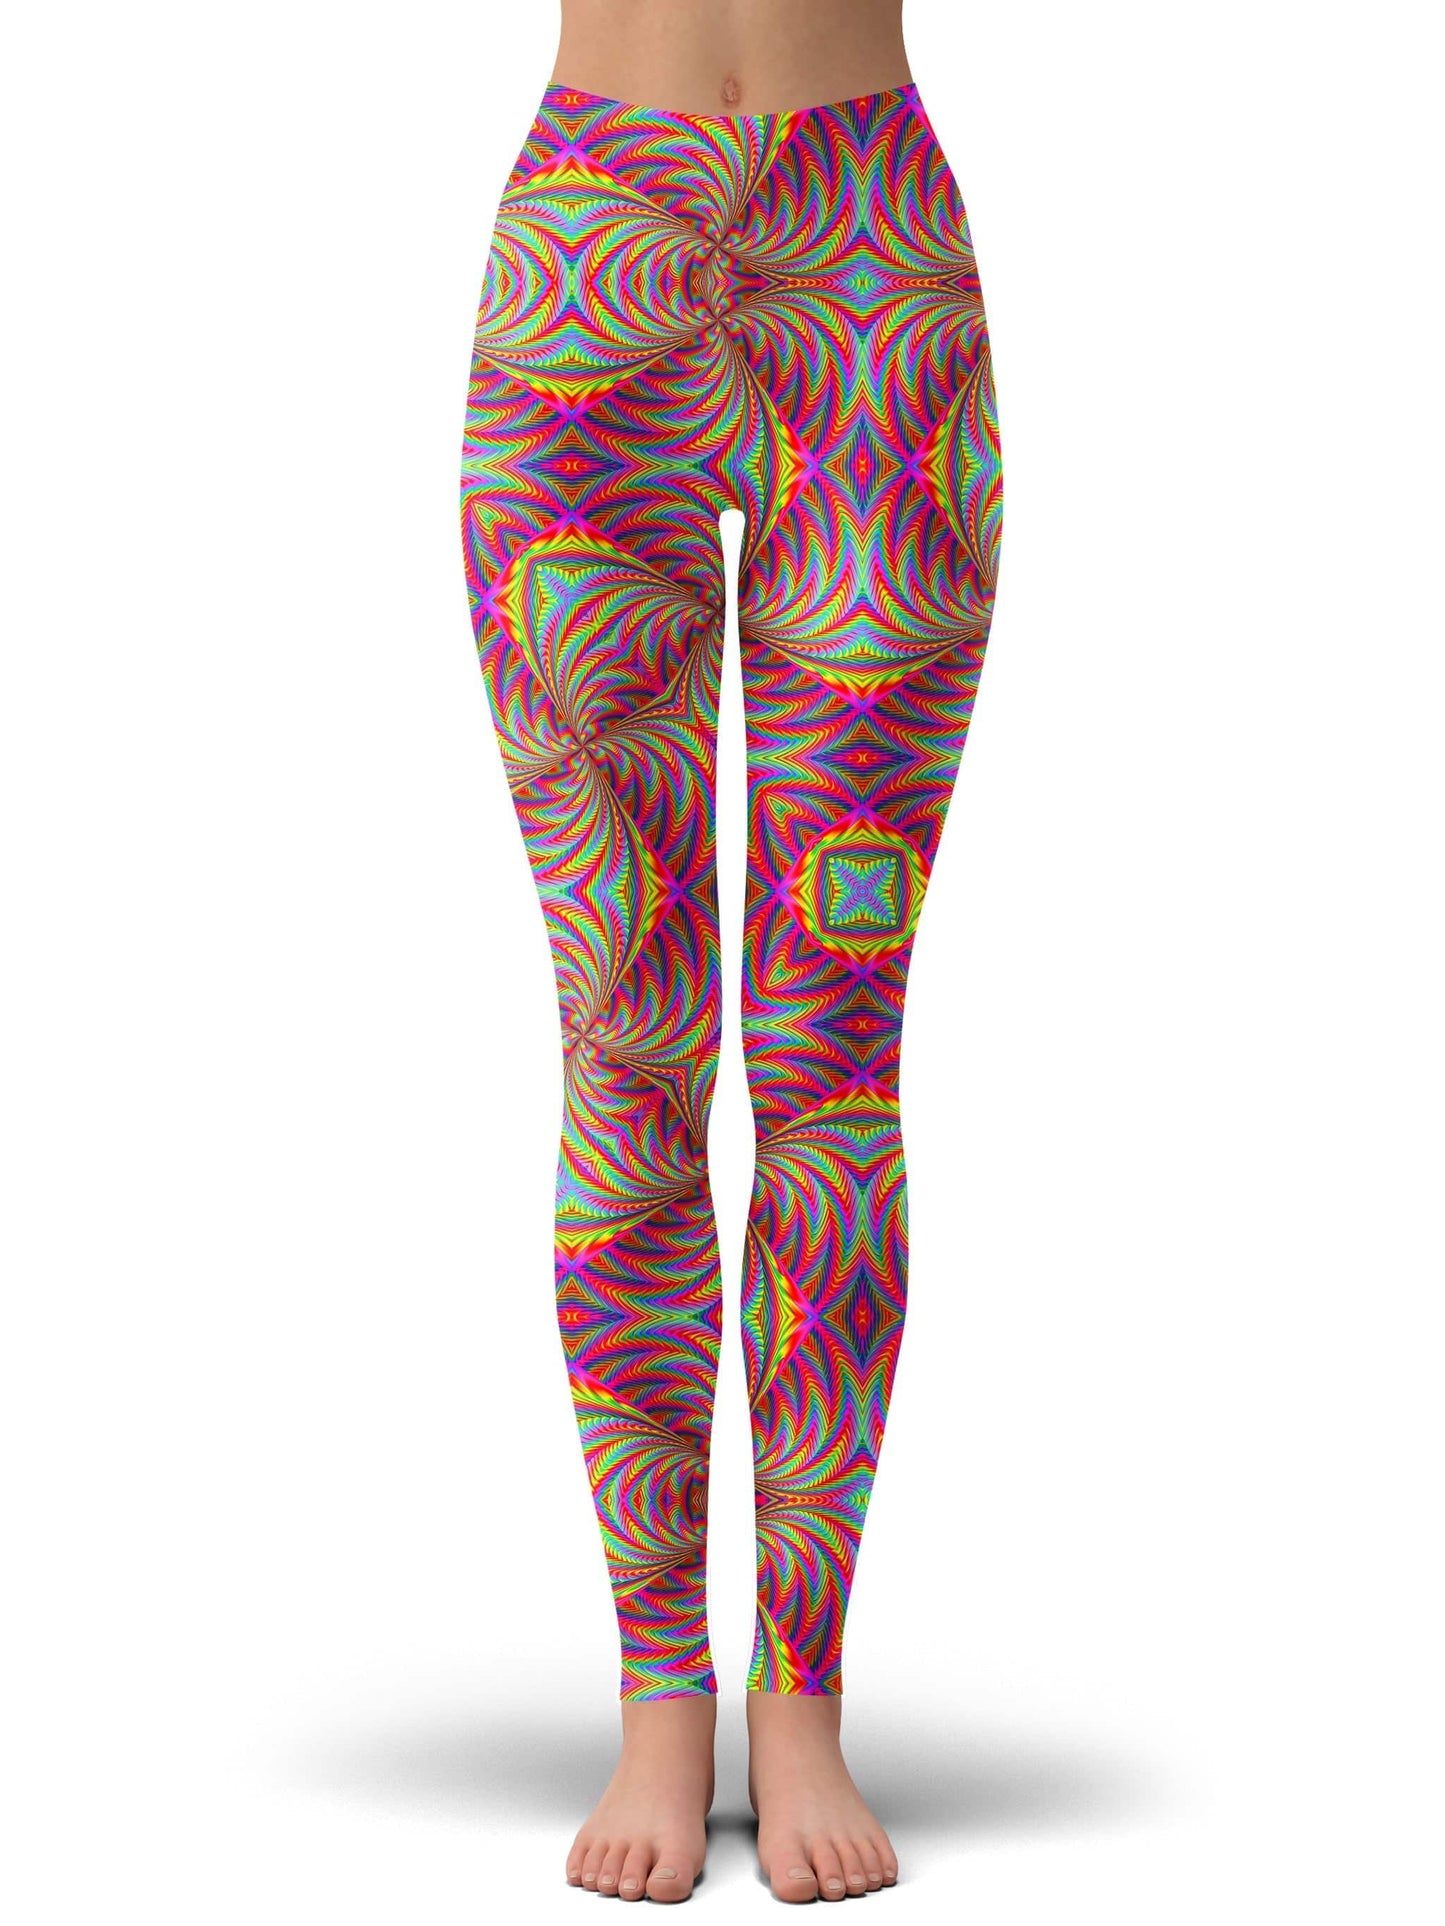 All The Faves Women's Tank and Leggings Combo, Art Design Works, | iEDM